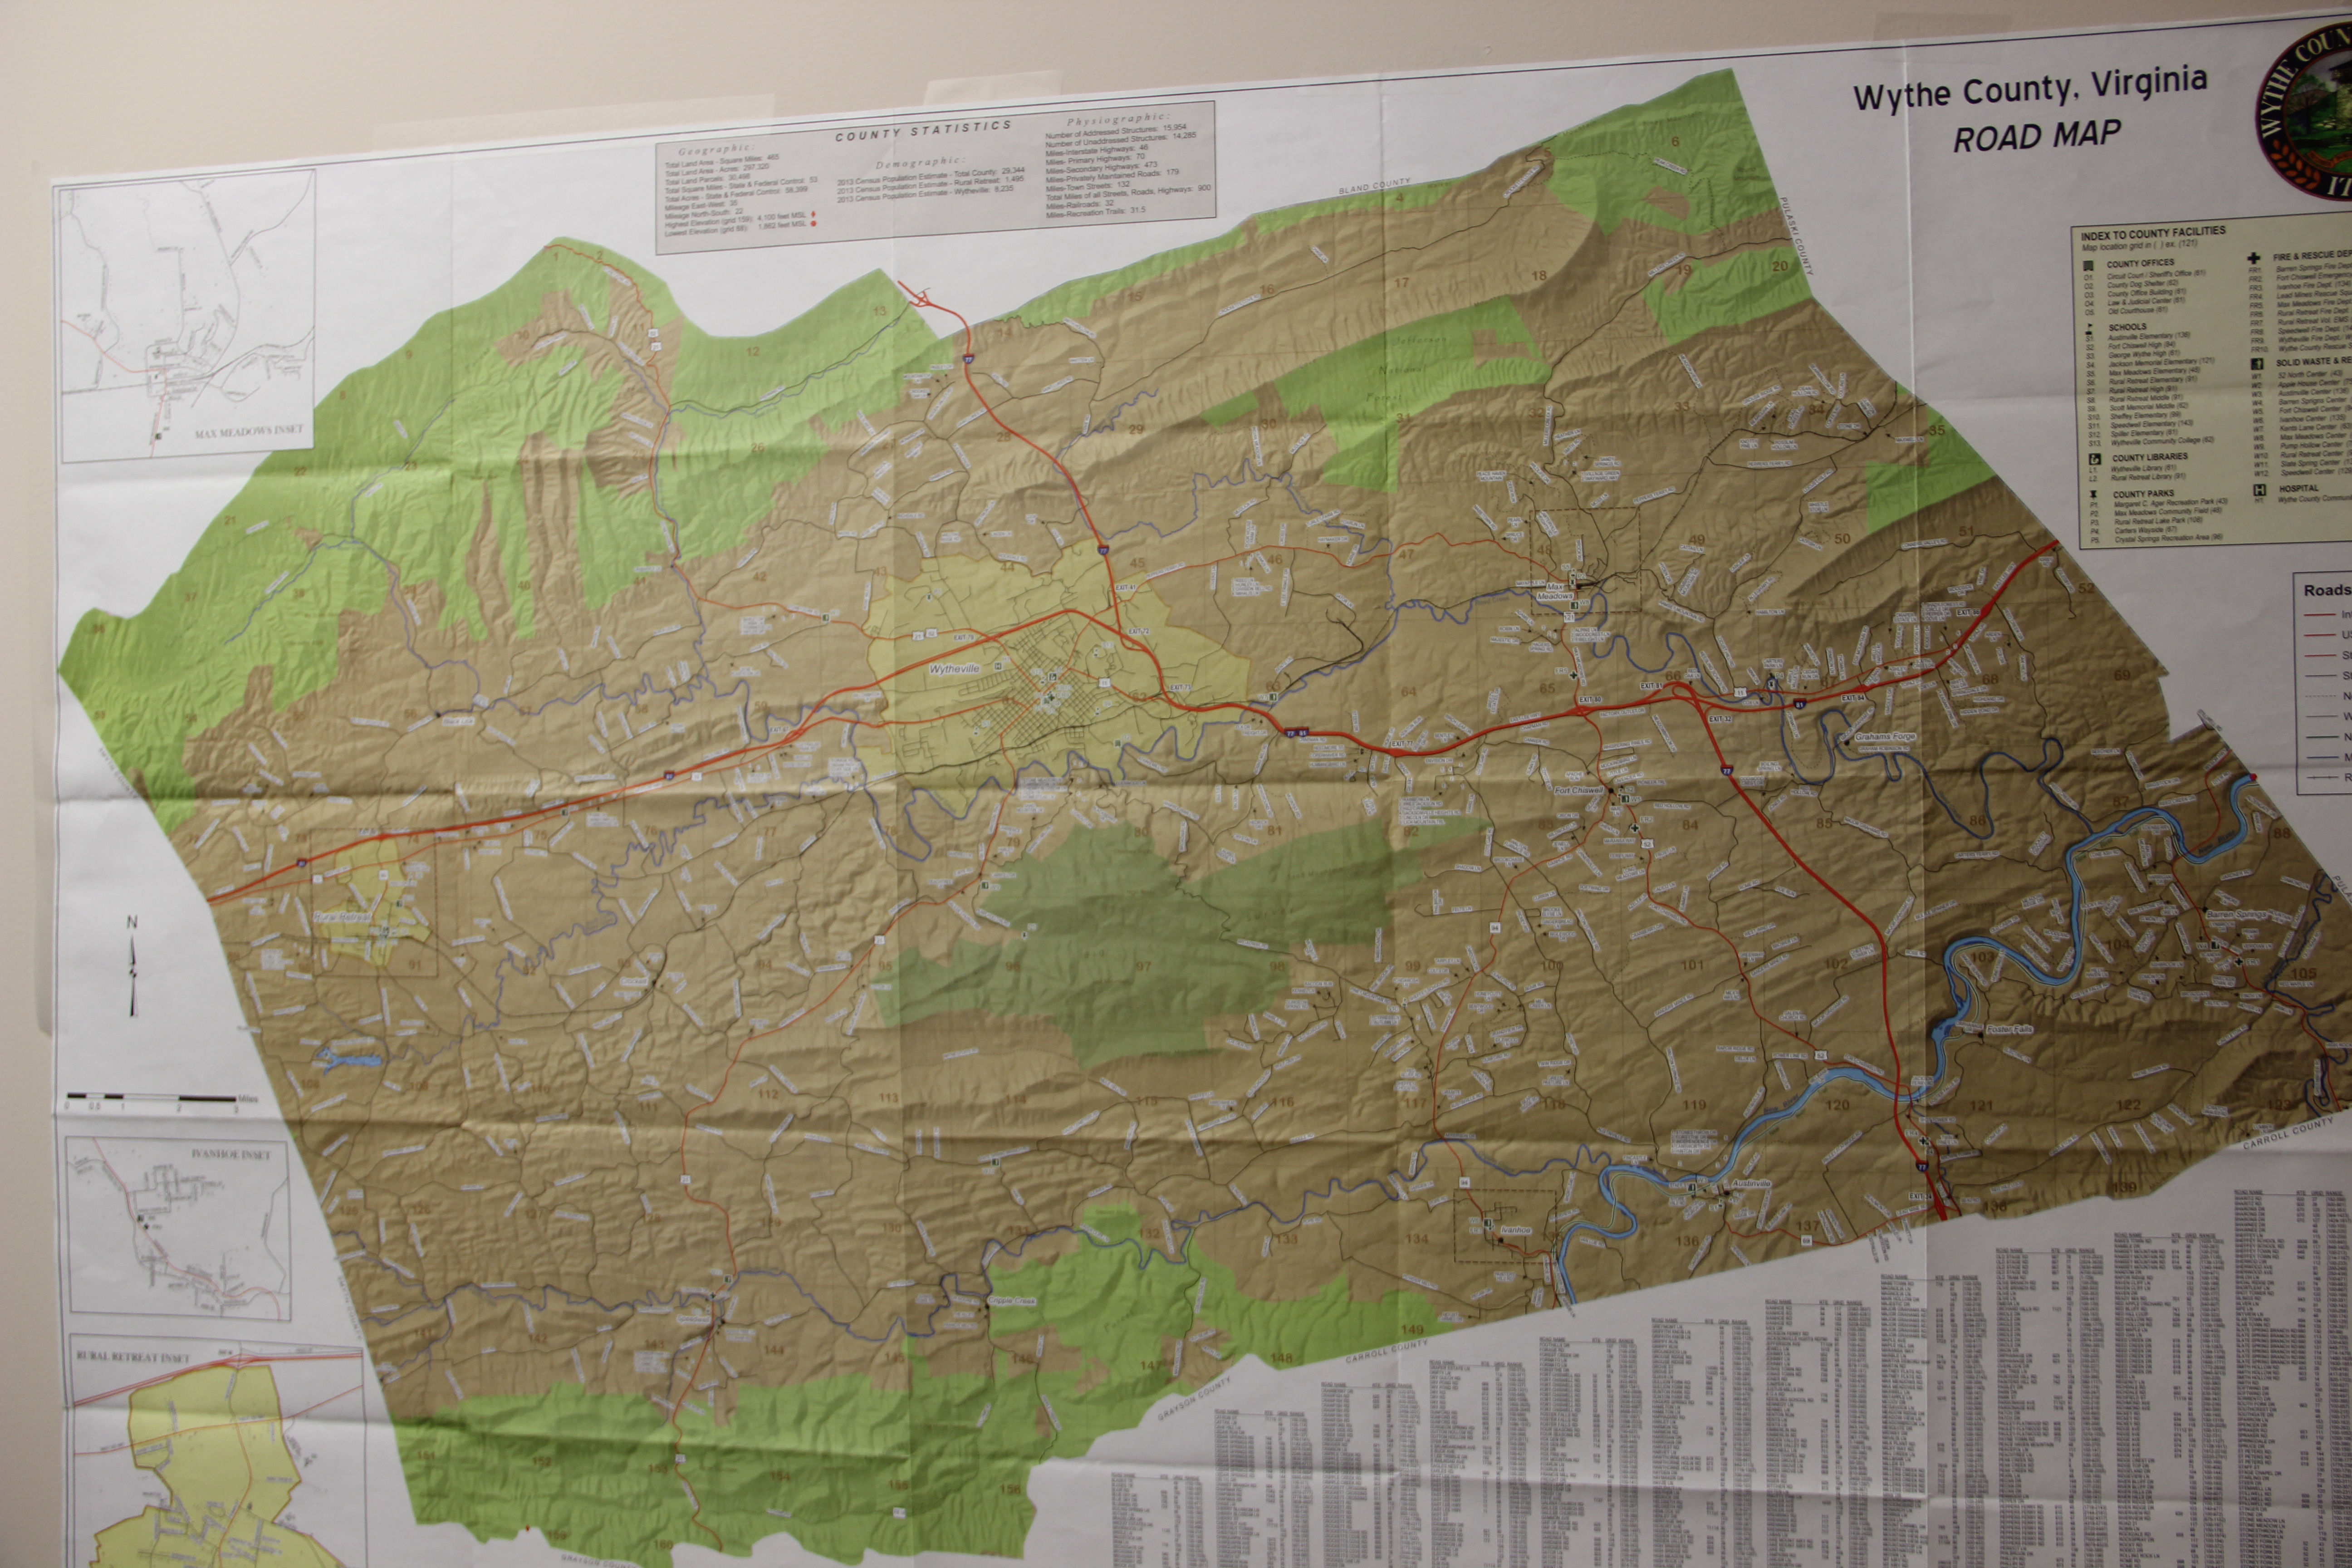 OFFICIAL 2015 WYTHE COUNTY ROAD MAPS NOW AVAILABLE